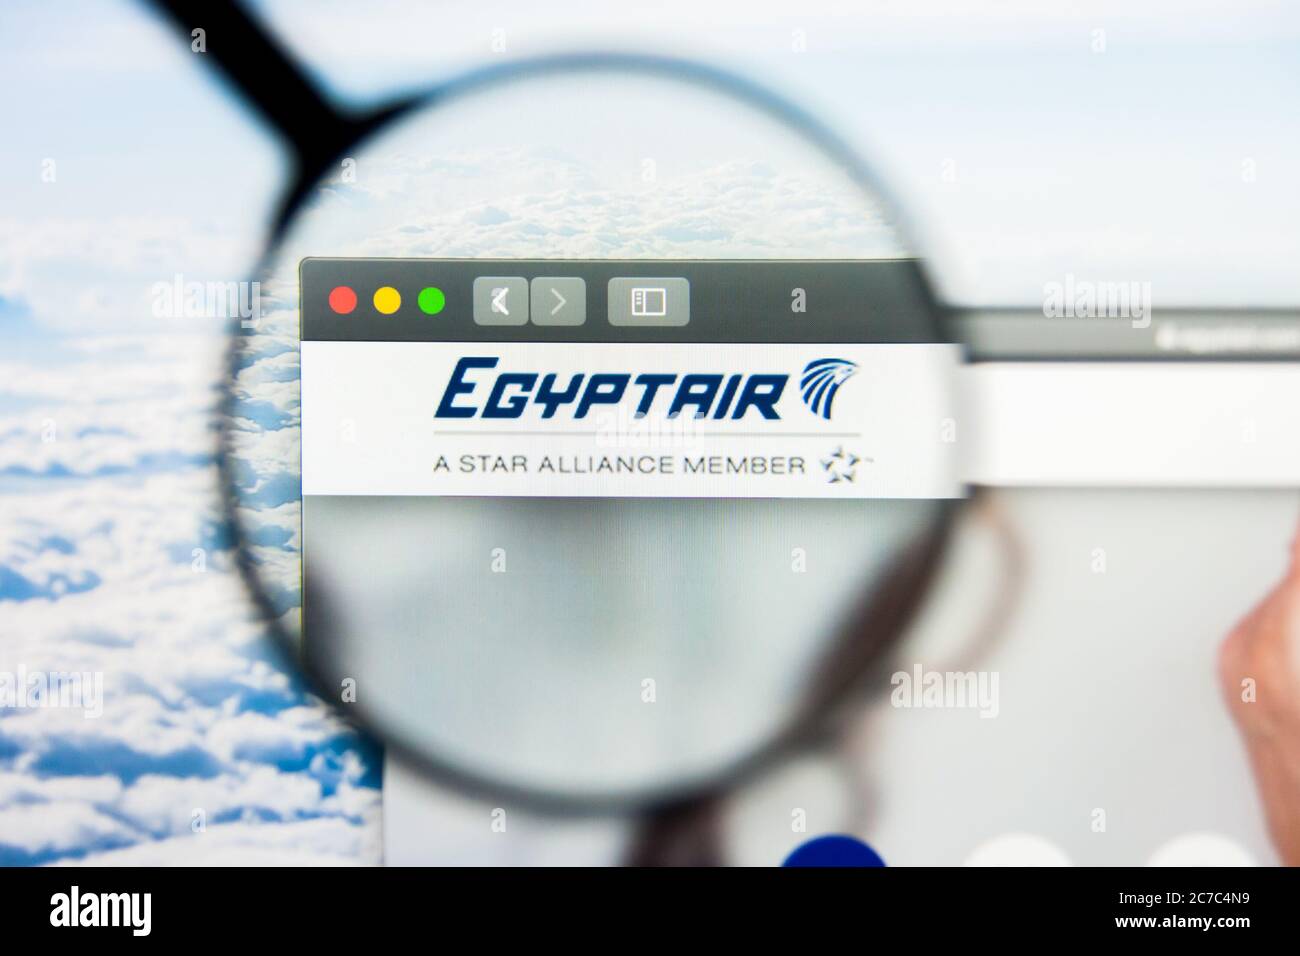 Los Angeles, California, USA - 21 March 2019: Illustrative Editorial of Egyptair website homepage. Egyptair logo visible on display screen. Stock Photo